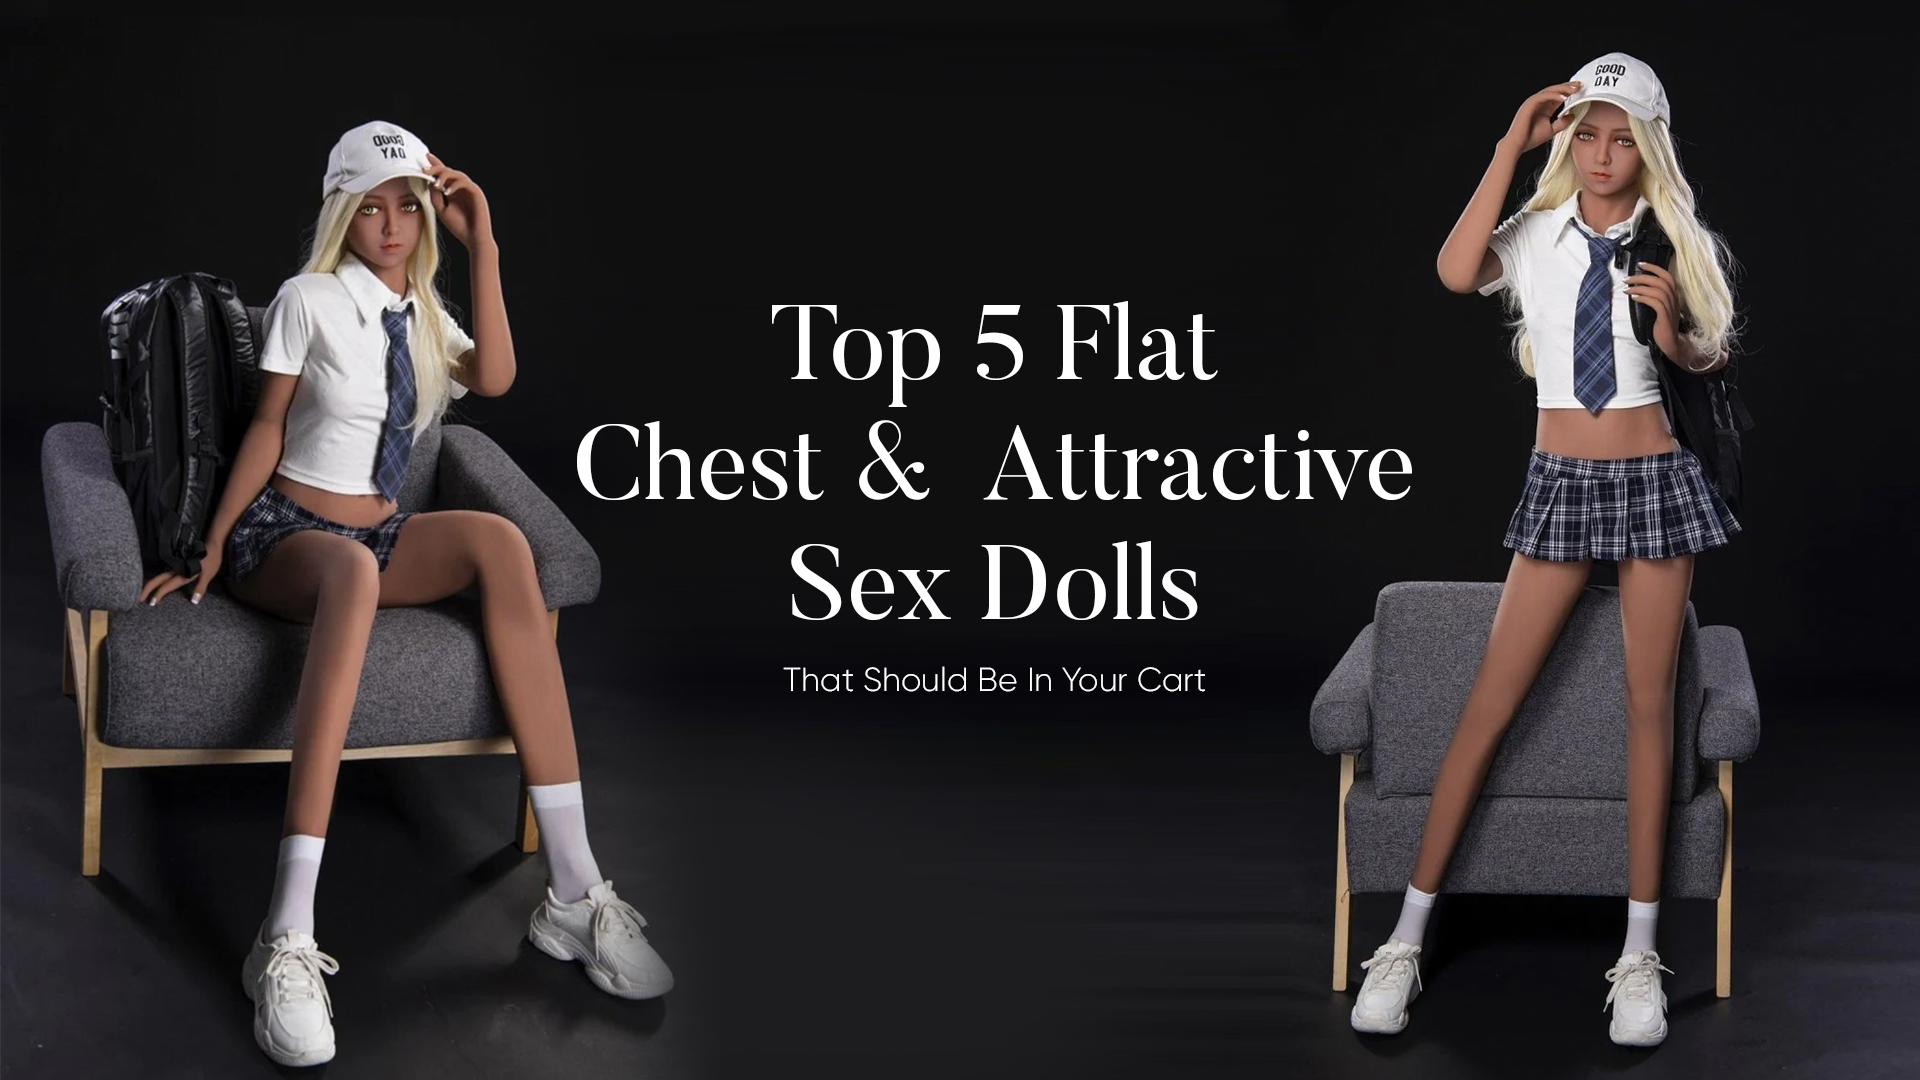 Top 5 Flat-Chested and Attractive Sex Dolls That Should Be in Your Shopping Cart